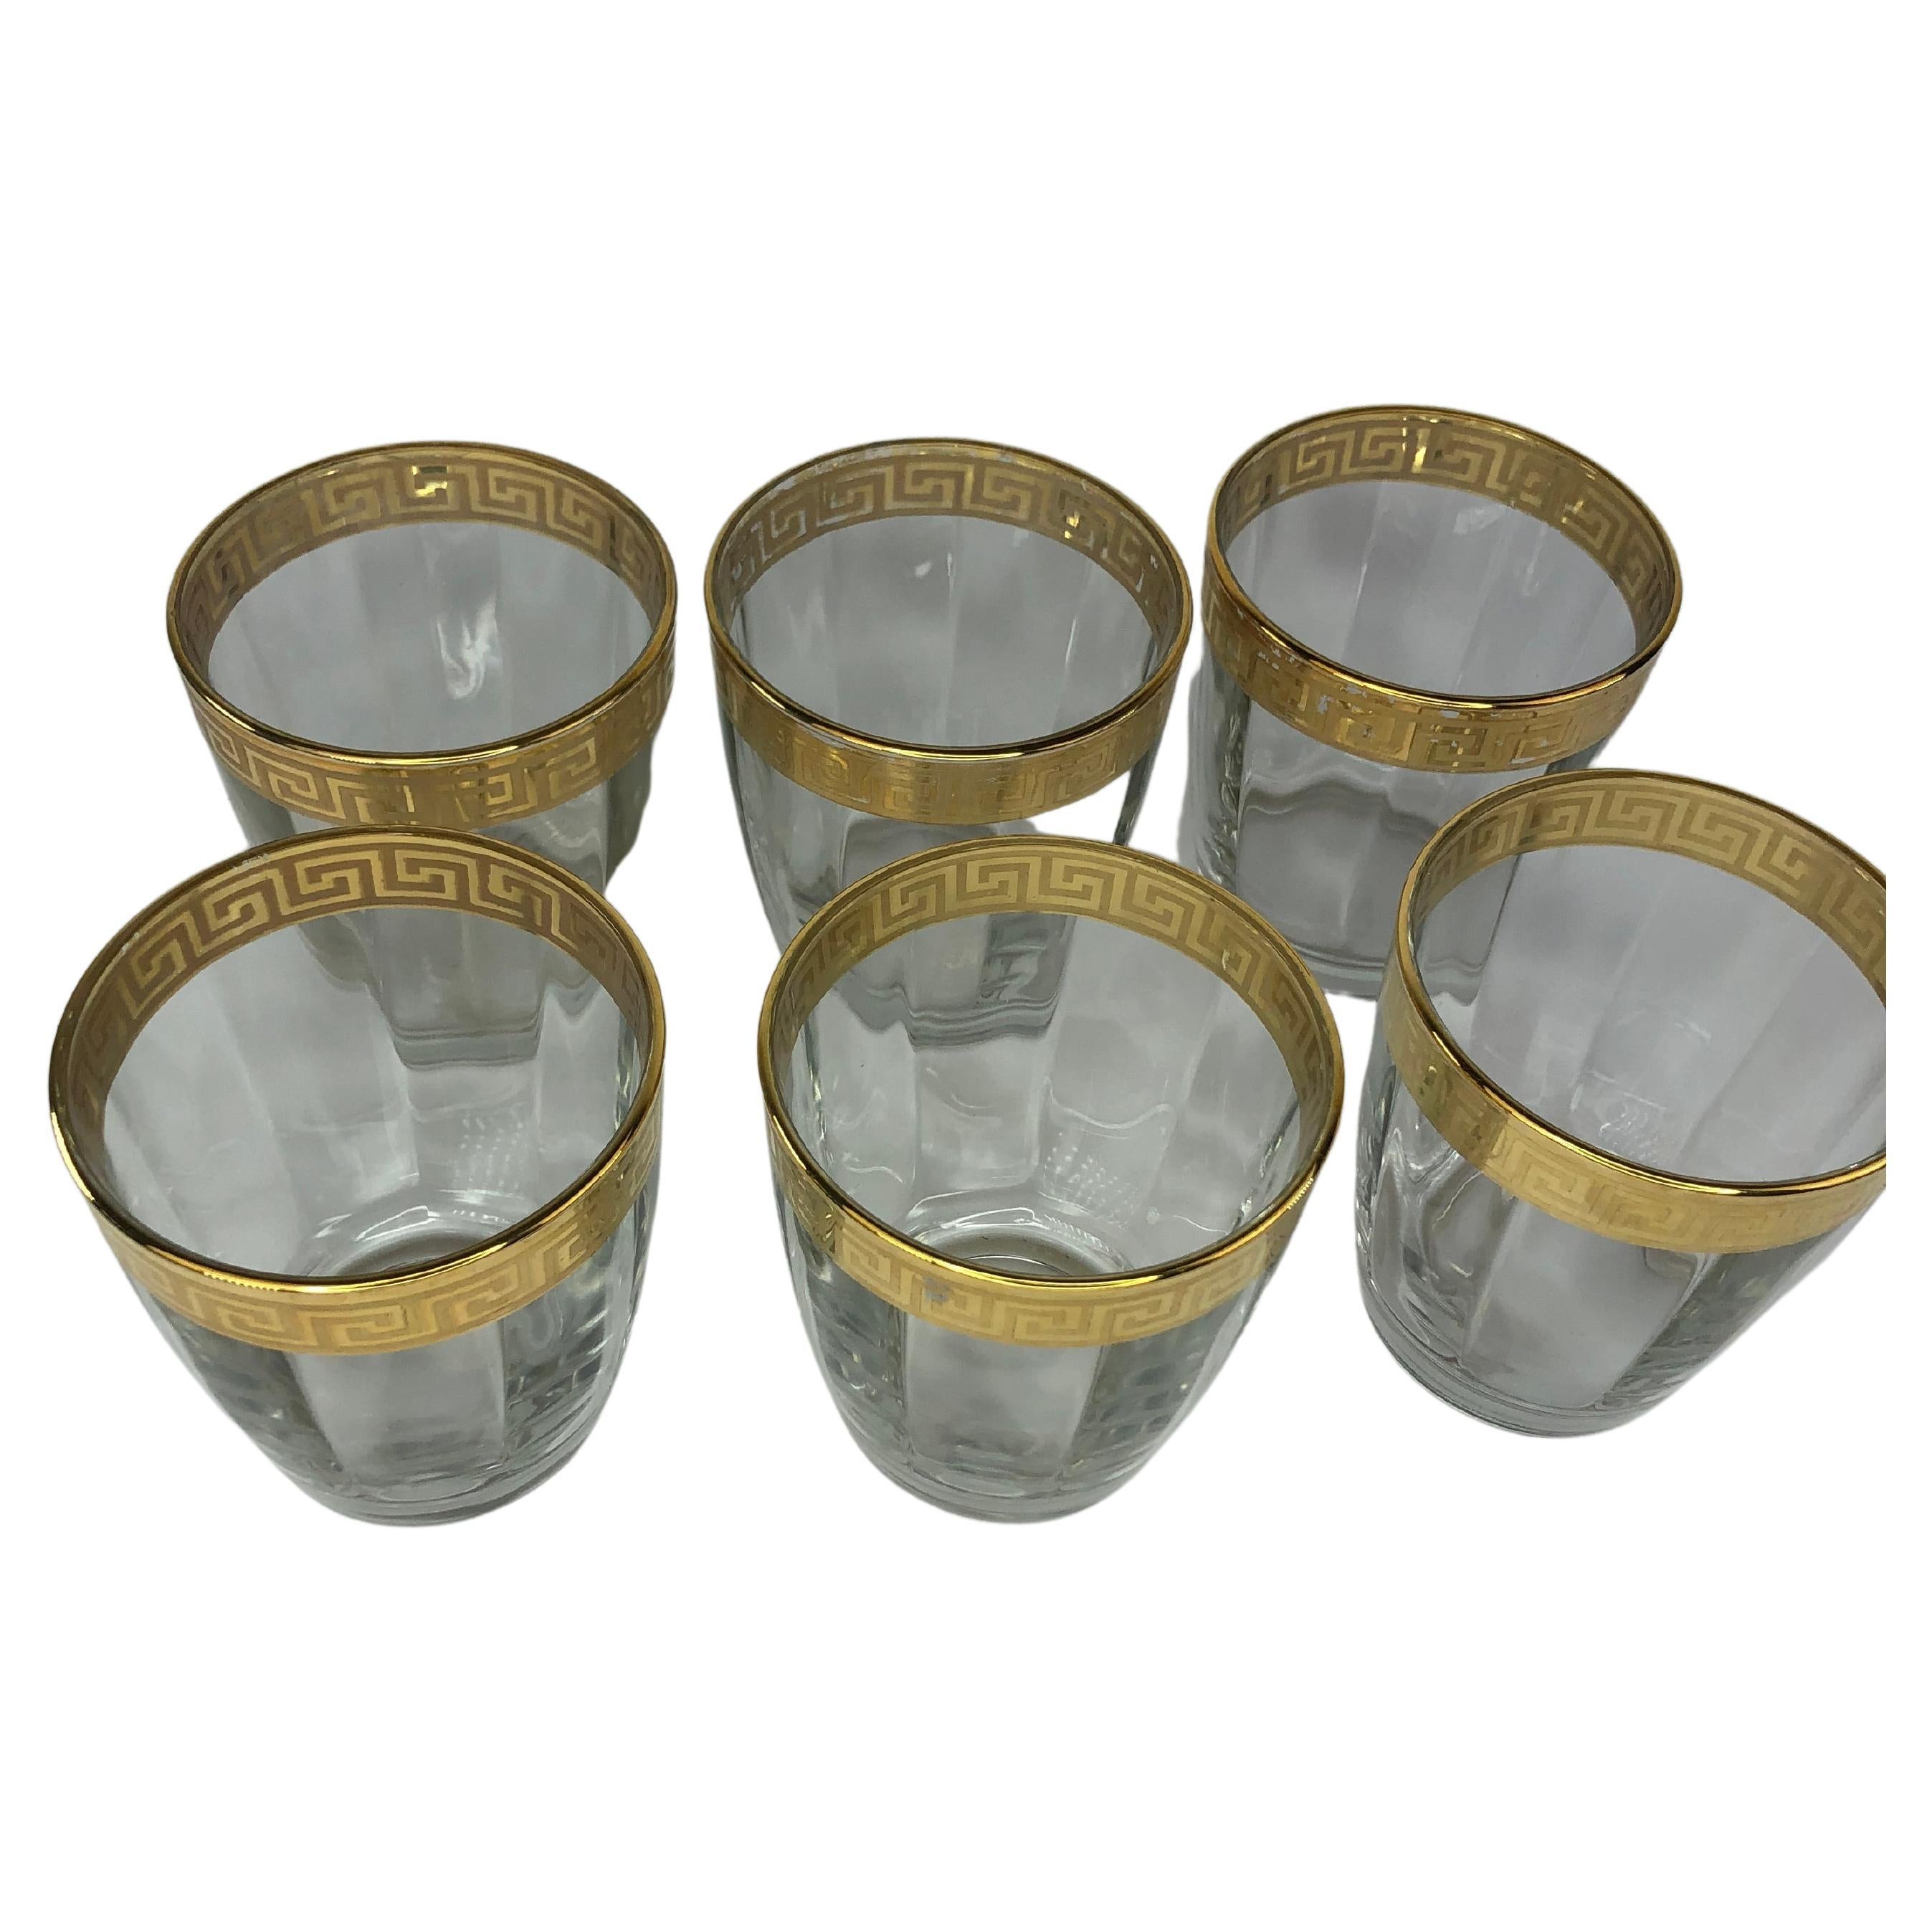 Mid-Century Modern gold banded cocktail glasses, set of six. This set of six rocks glasses is exceptionally elegant with the striking gold overlay Greek key design wide band at the lip of the glass. The glass has a vertical bevel making it even more